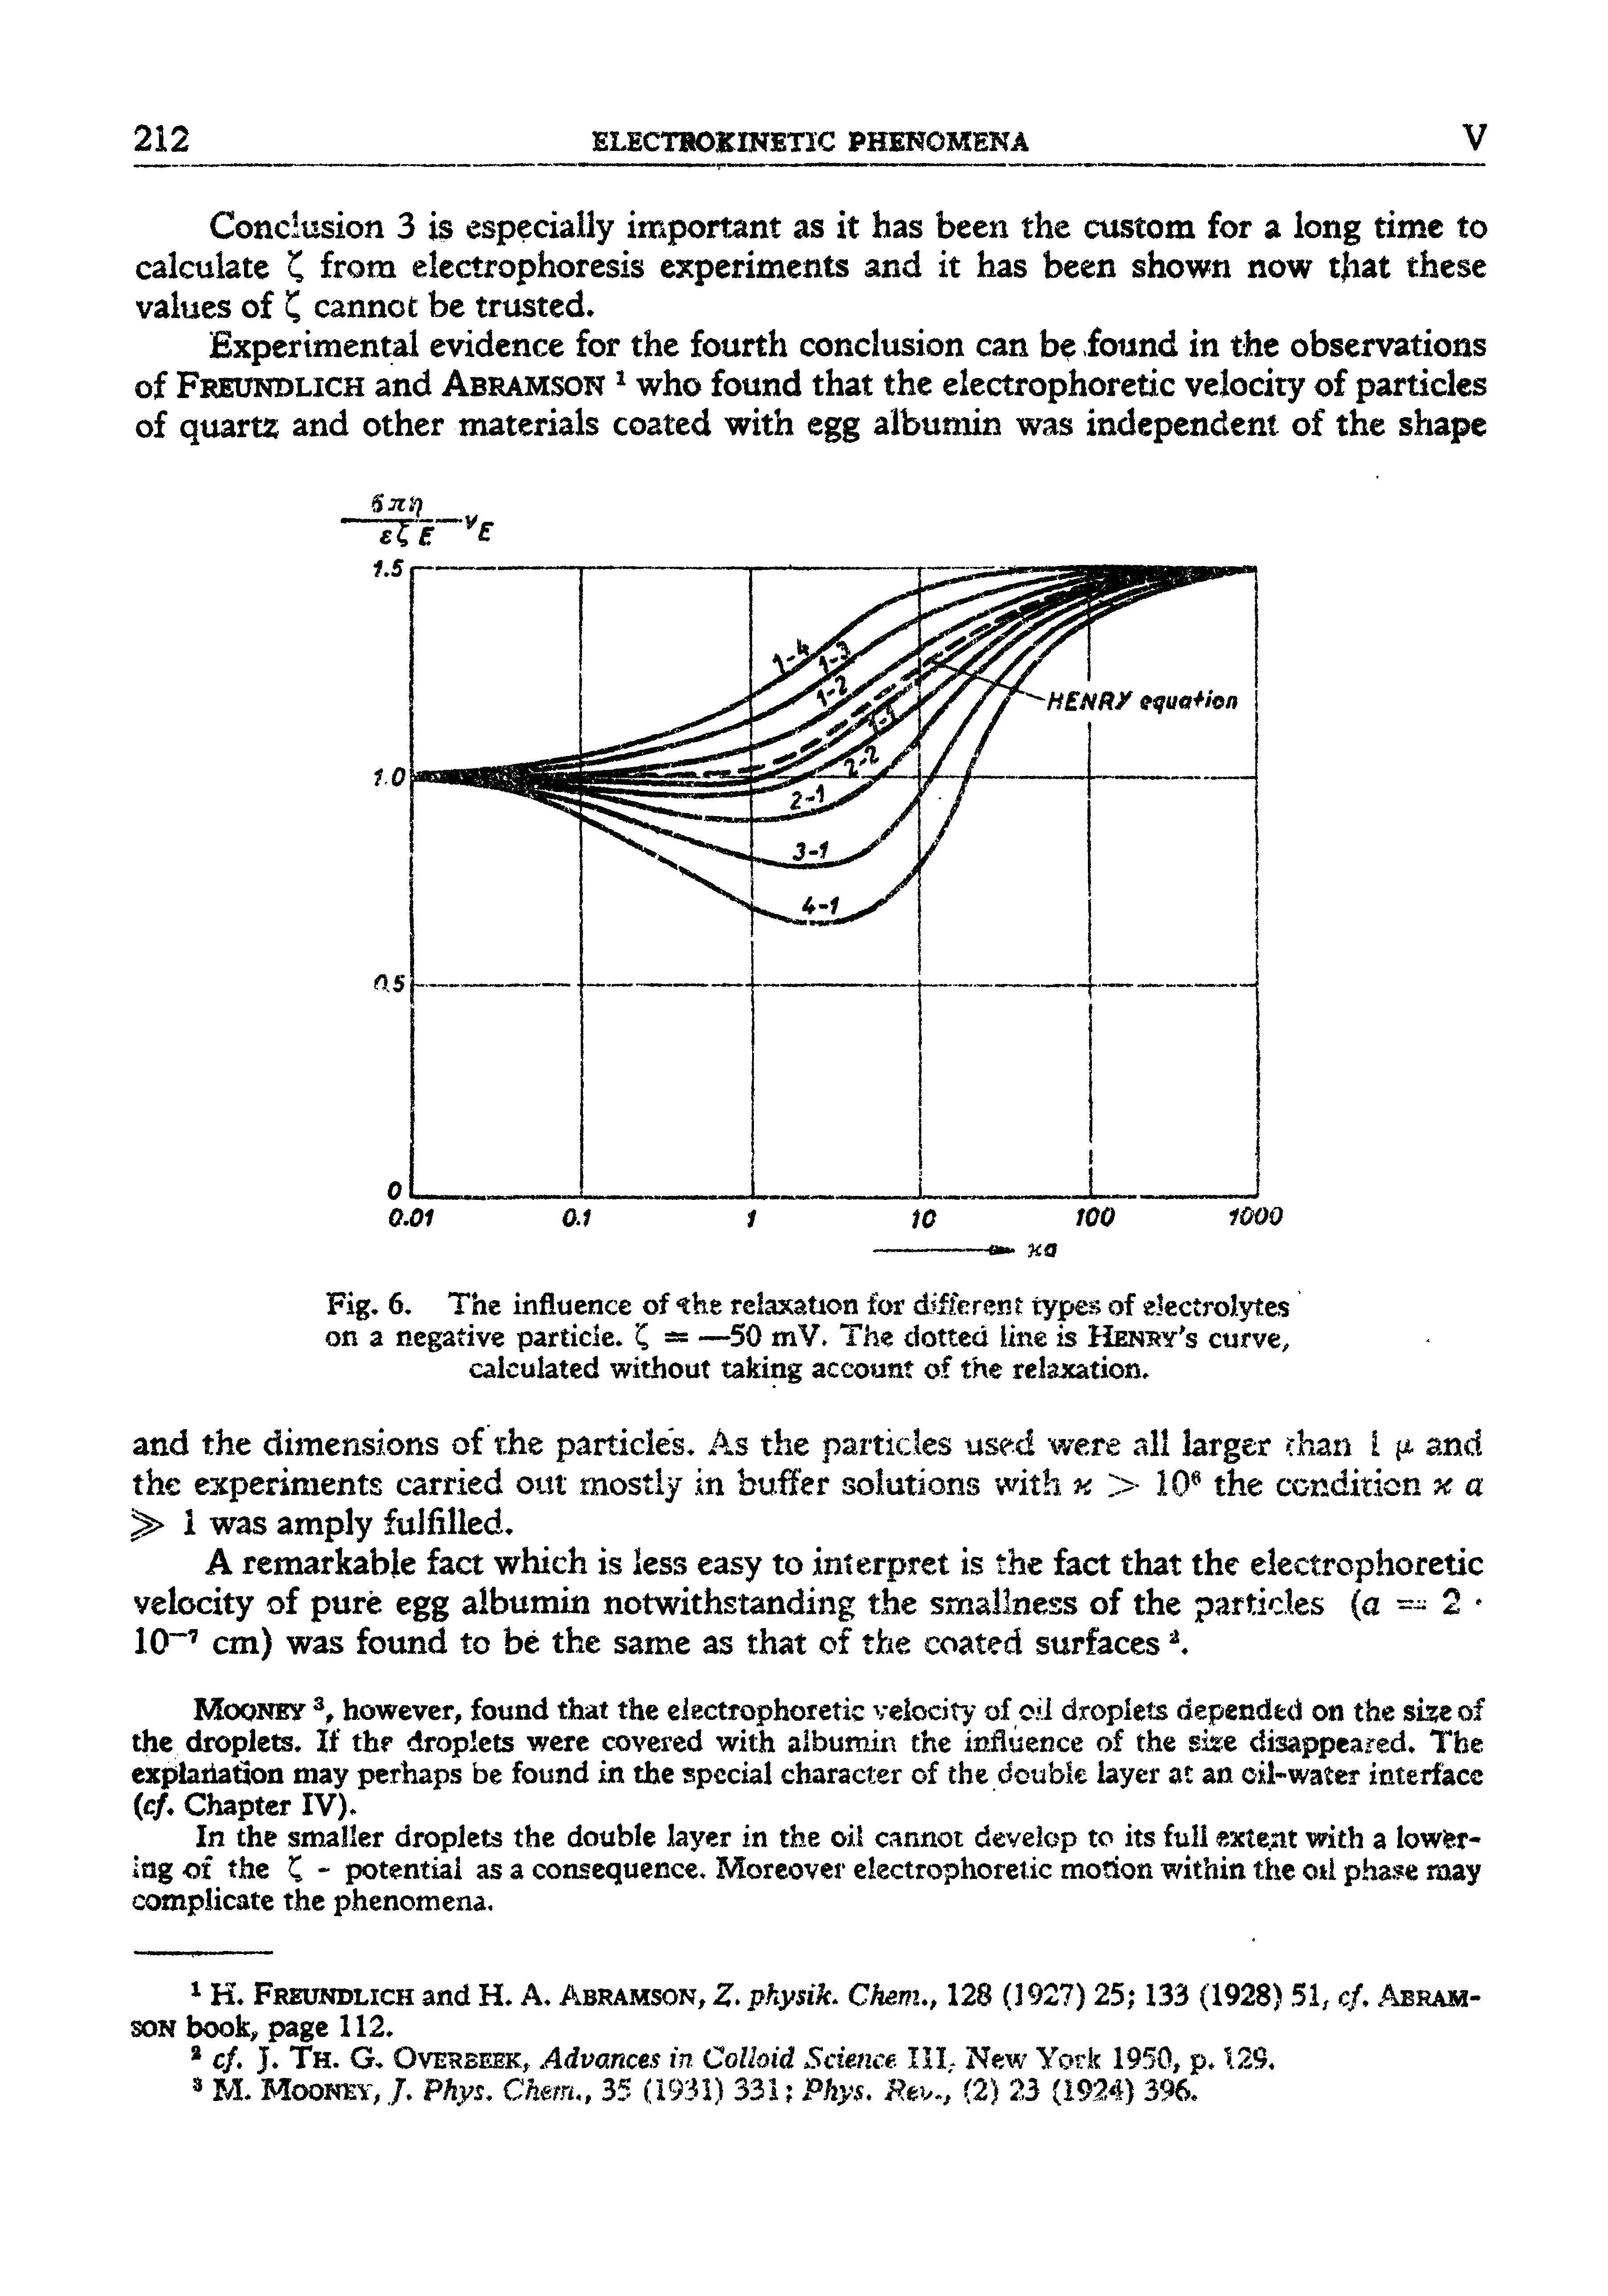 Fig. 6. The influence of the relaxation for different types of electrolytes on a negative particle. Q —50 mV The dotted line is Henhy s curve, calculated without taking account of the relaxation.